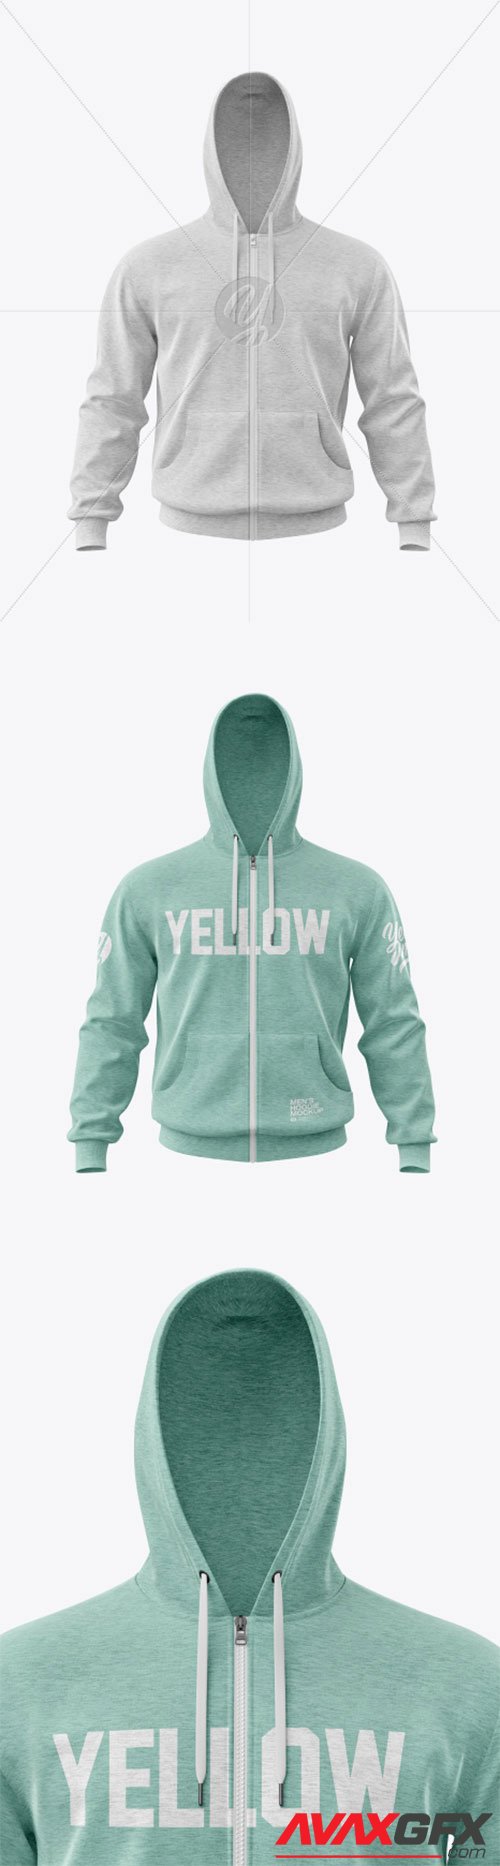 Download Melange Hoodie Mockup - Front View 47881 » AVAXGFX - All ...